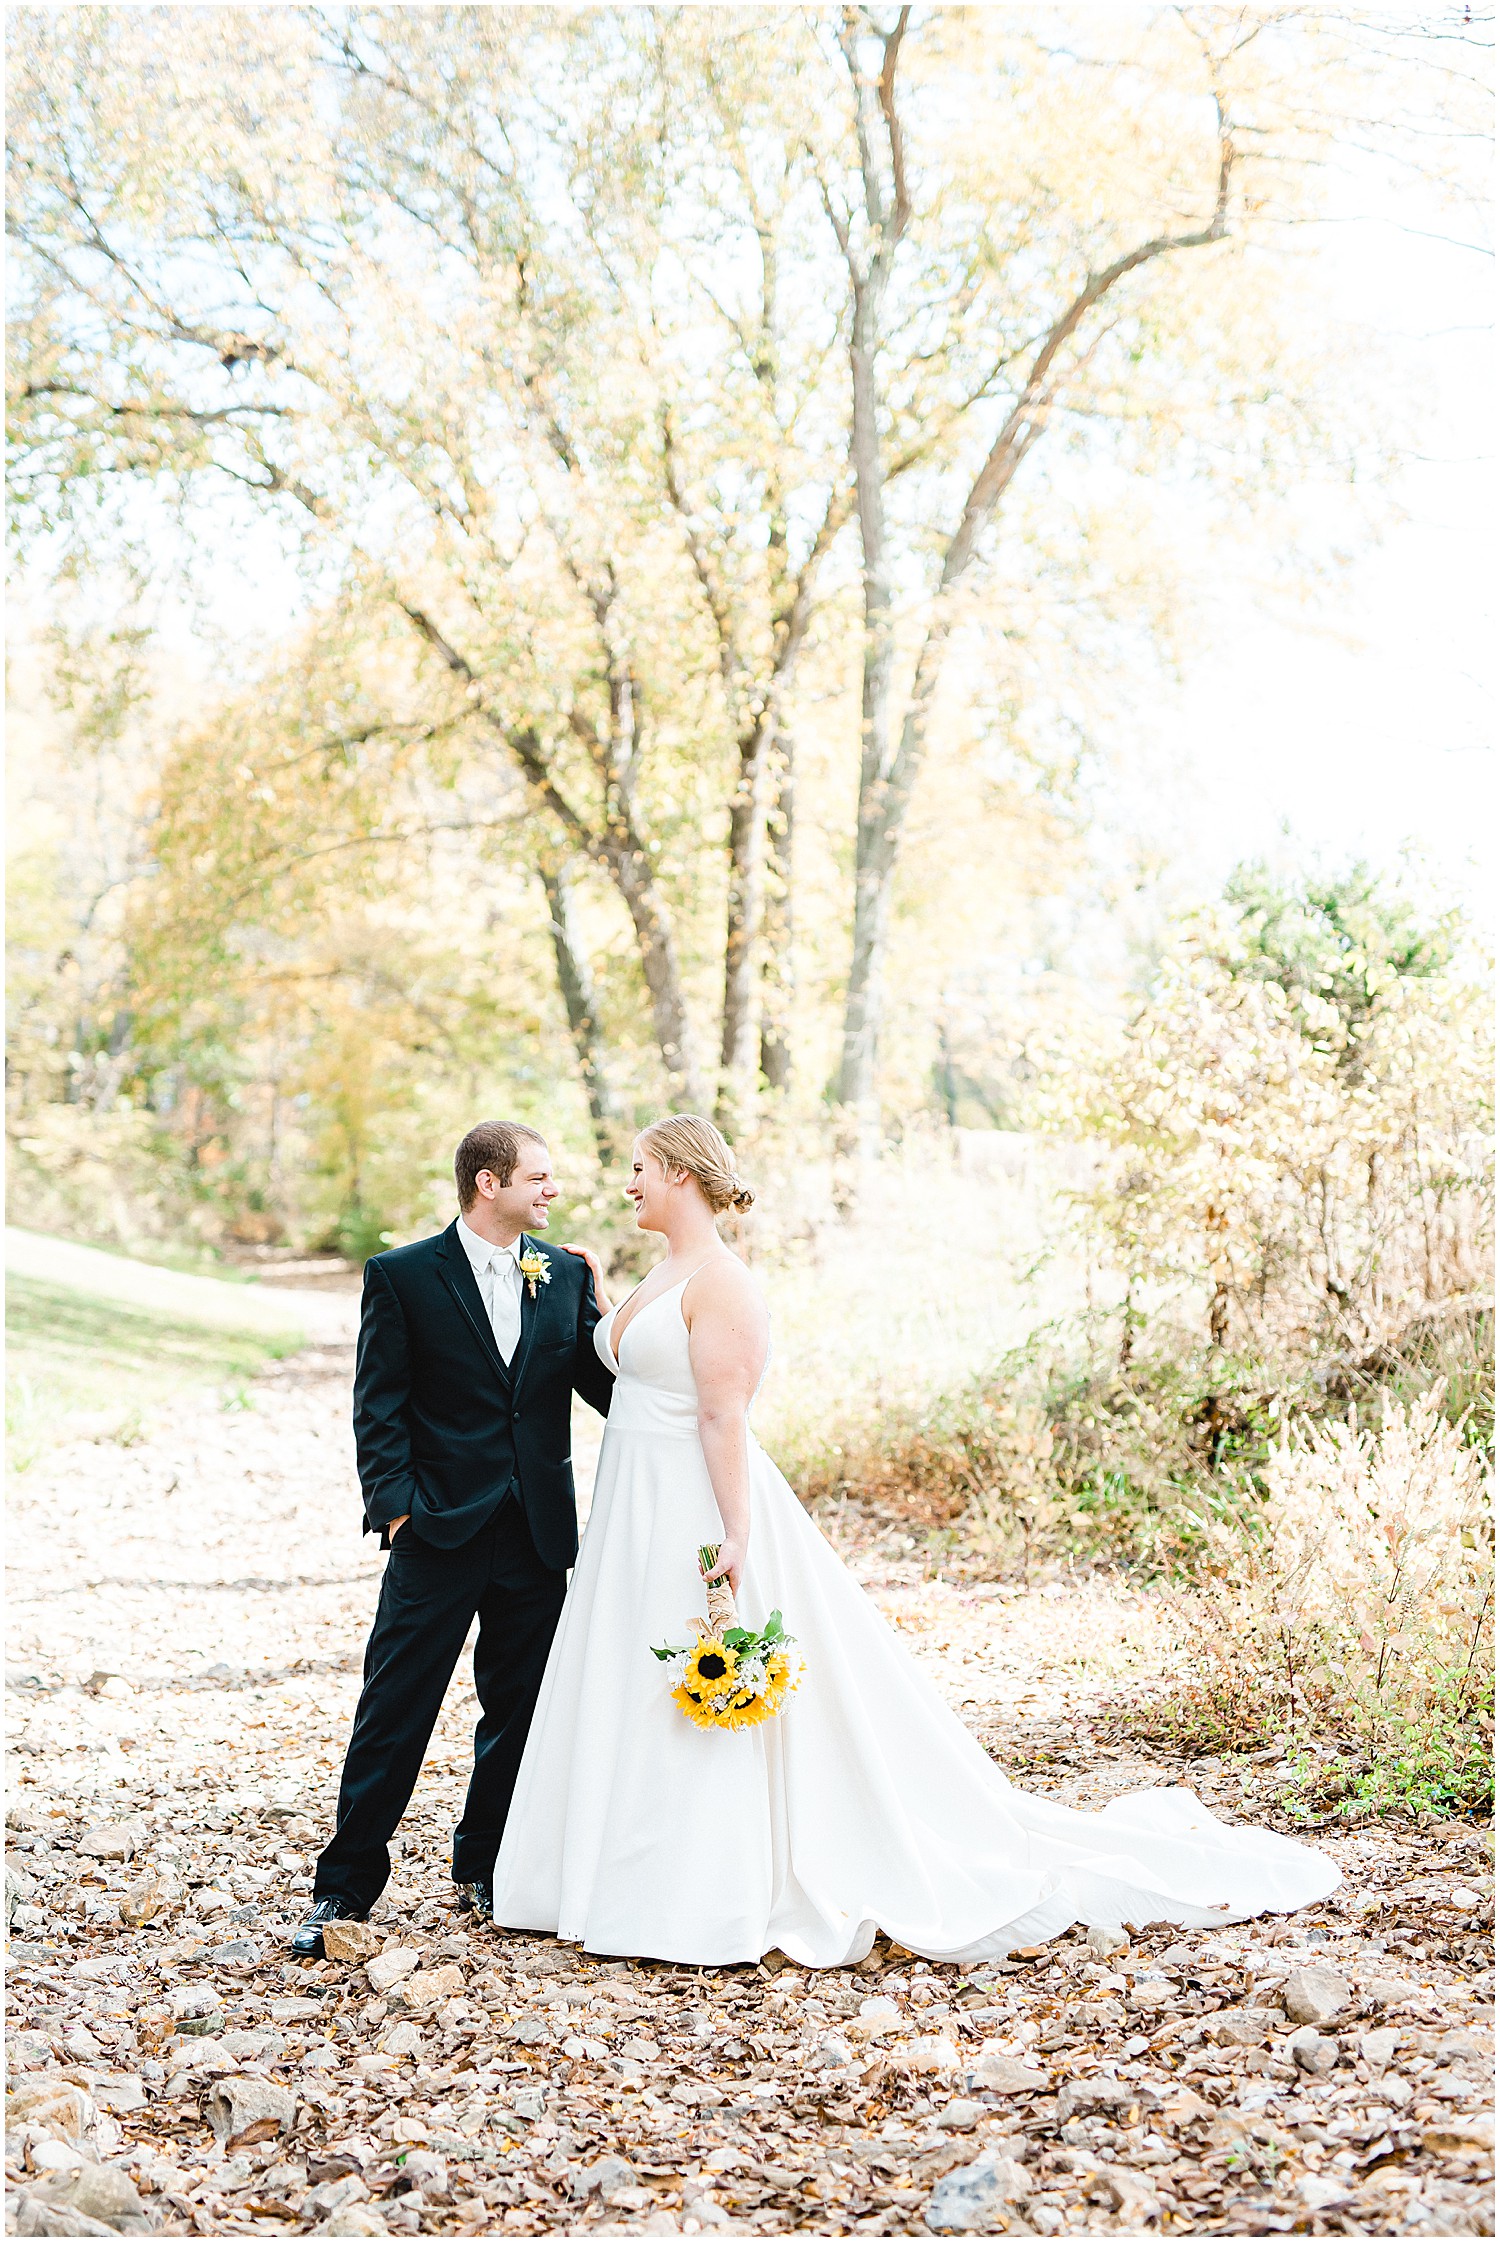 bride and groom smile at each other in the creek bed at kempker's back 40 wedding venue